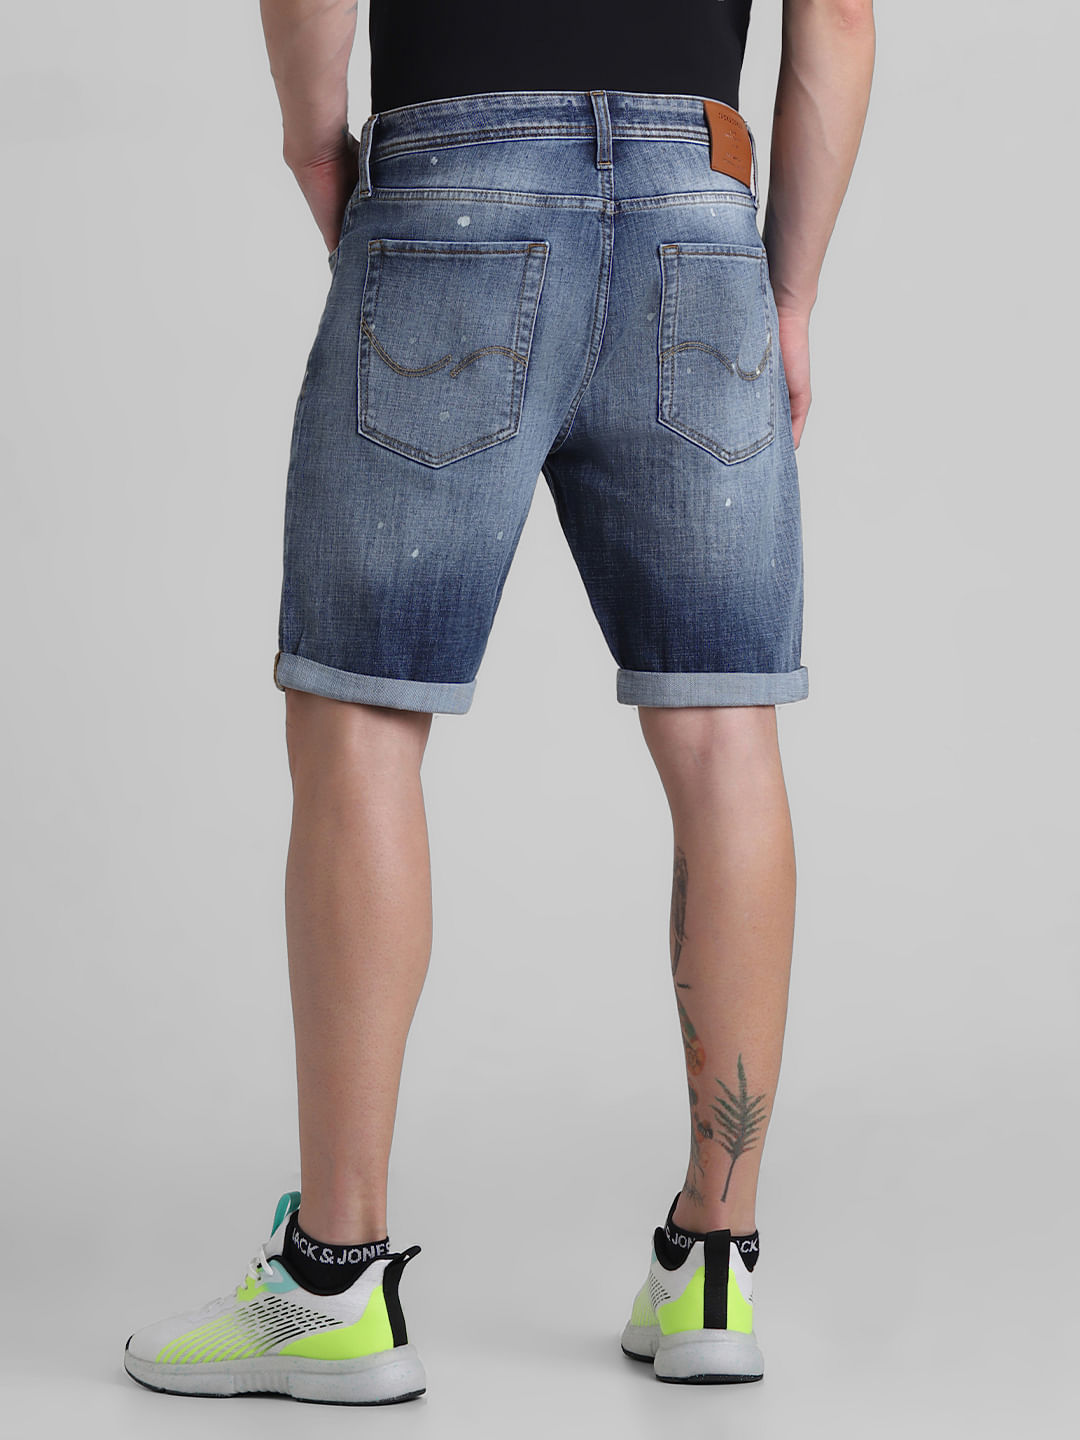 Women Sexy Distressed Ripped Holes High Waist Denim Shorts Stretch Short  Jeans Tassel Short Esg13548 - China Shorts and Denim Short price |  Made-in-China.com